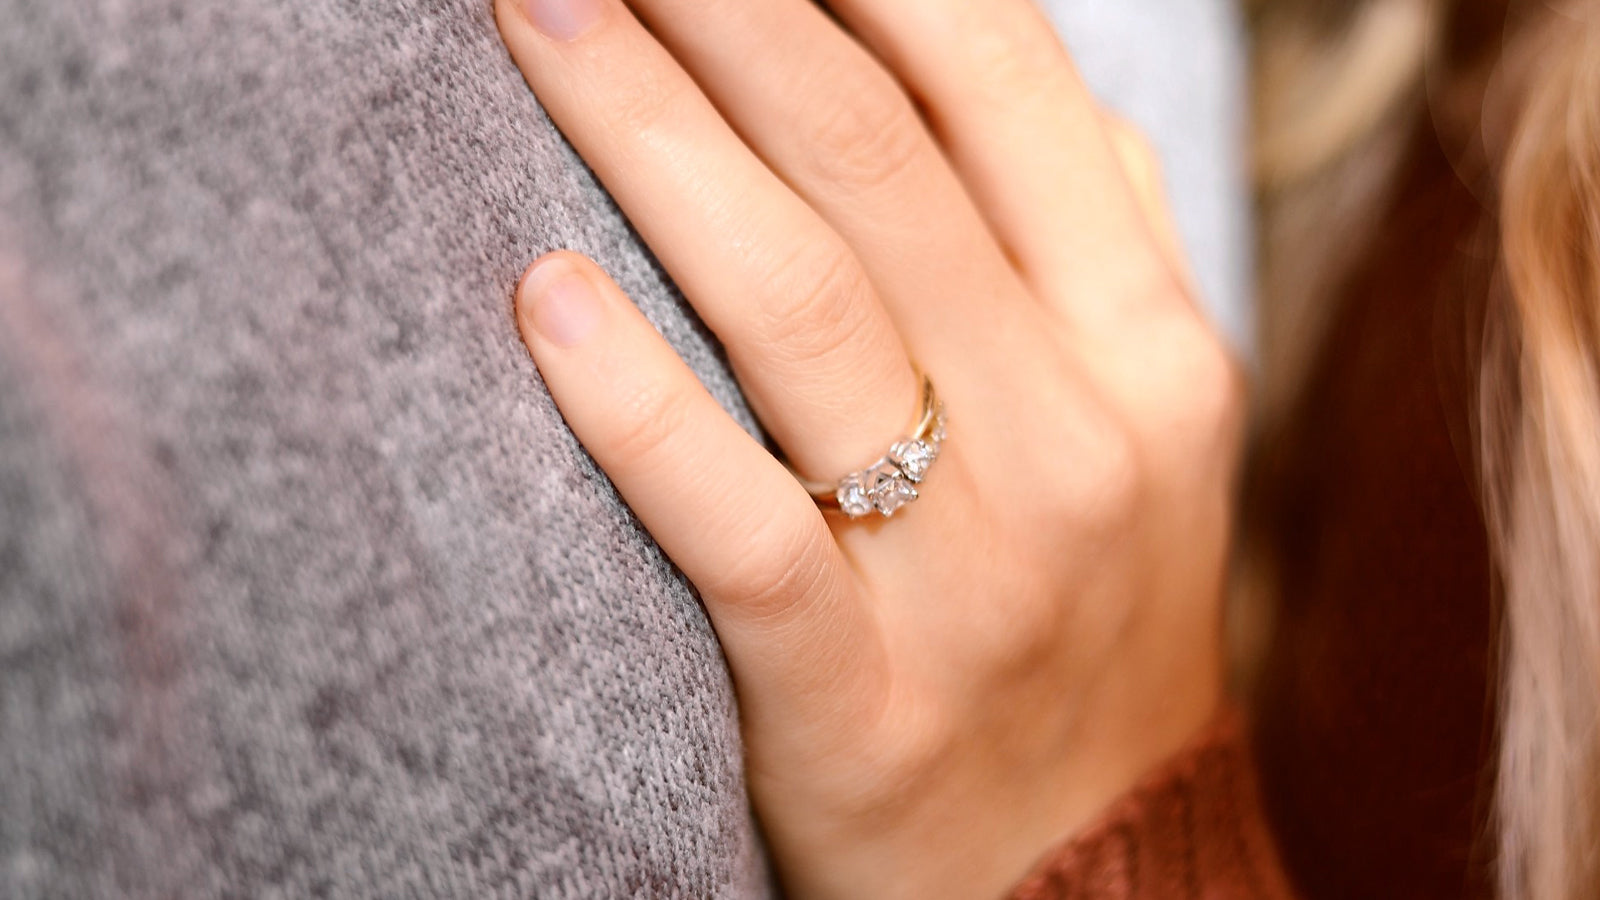 HOW TO WEAR YOUR ENGAGEMENT RING AND WEDDING BAND - SHIMANSKY.CO.ZA